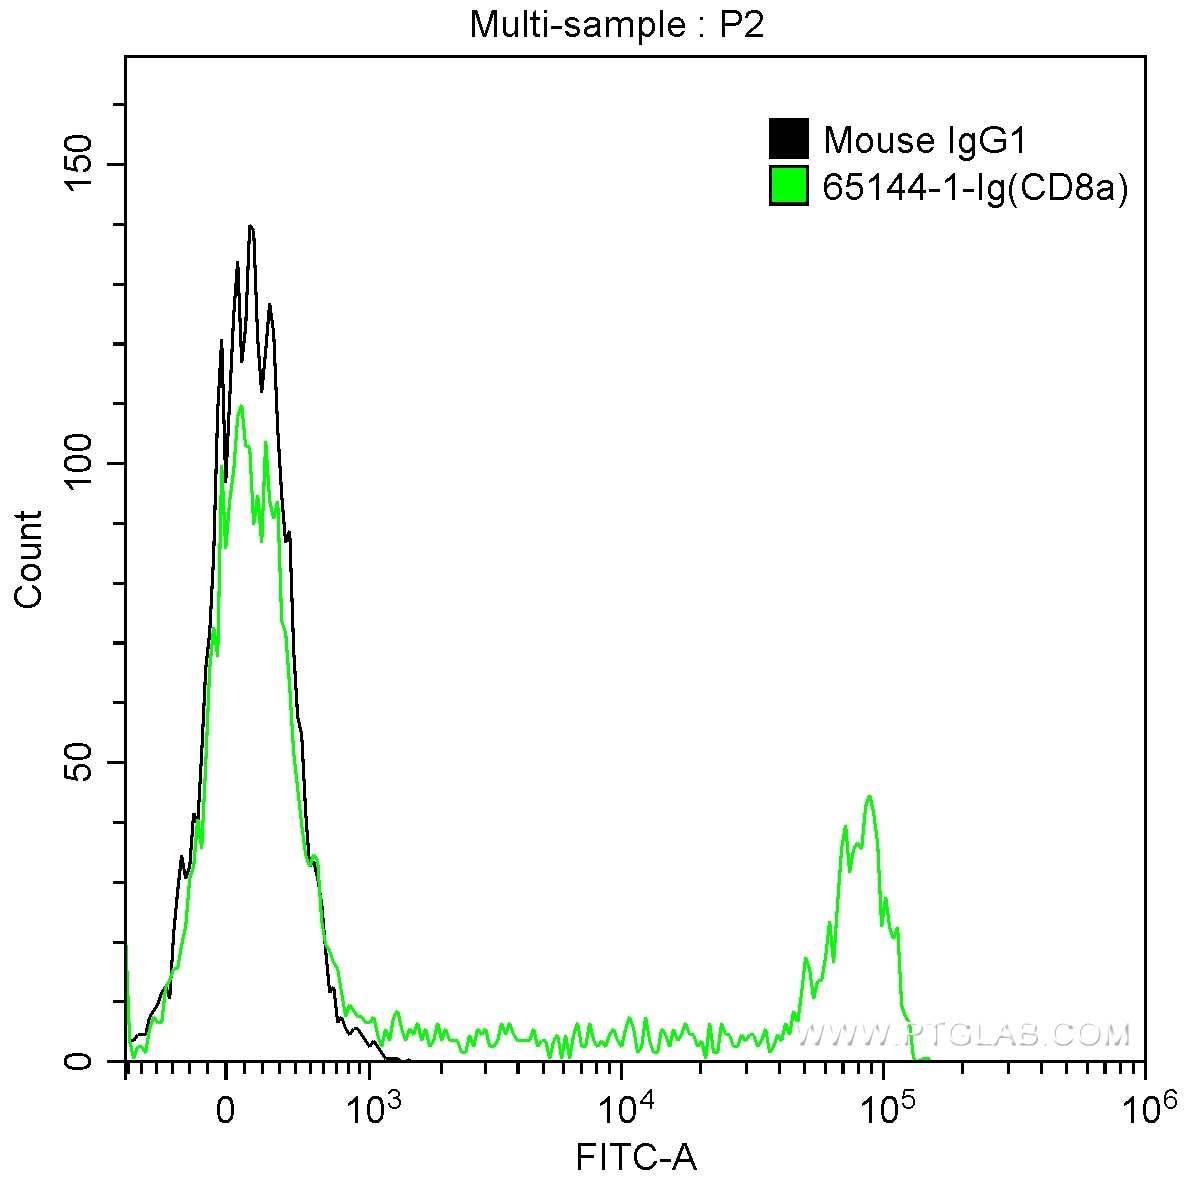 Flow cytometry (FC) experiment of human peripheral blood lymphocytes using Anti-Human CD8a (RPA-T8) (65144-1-Ig)